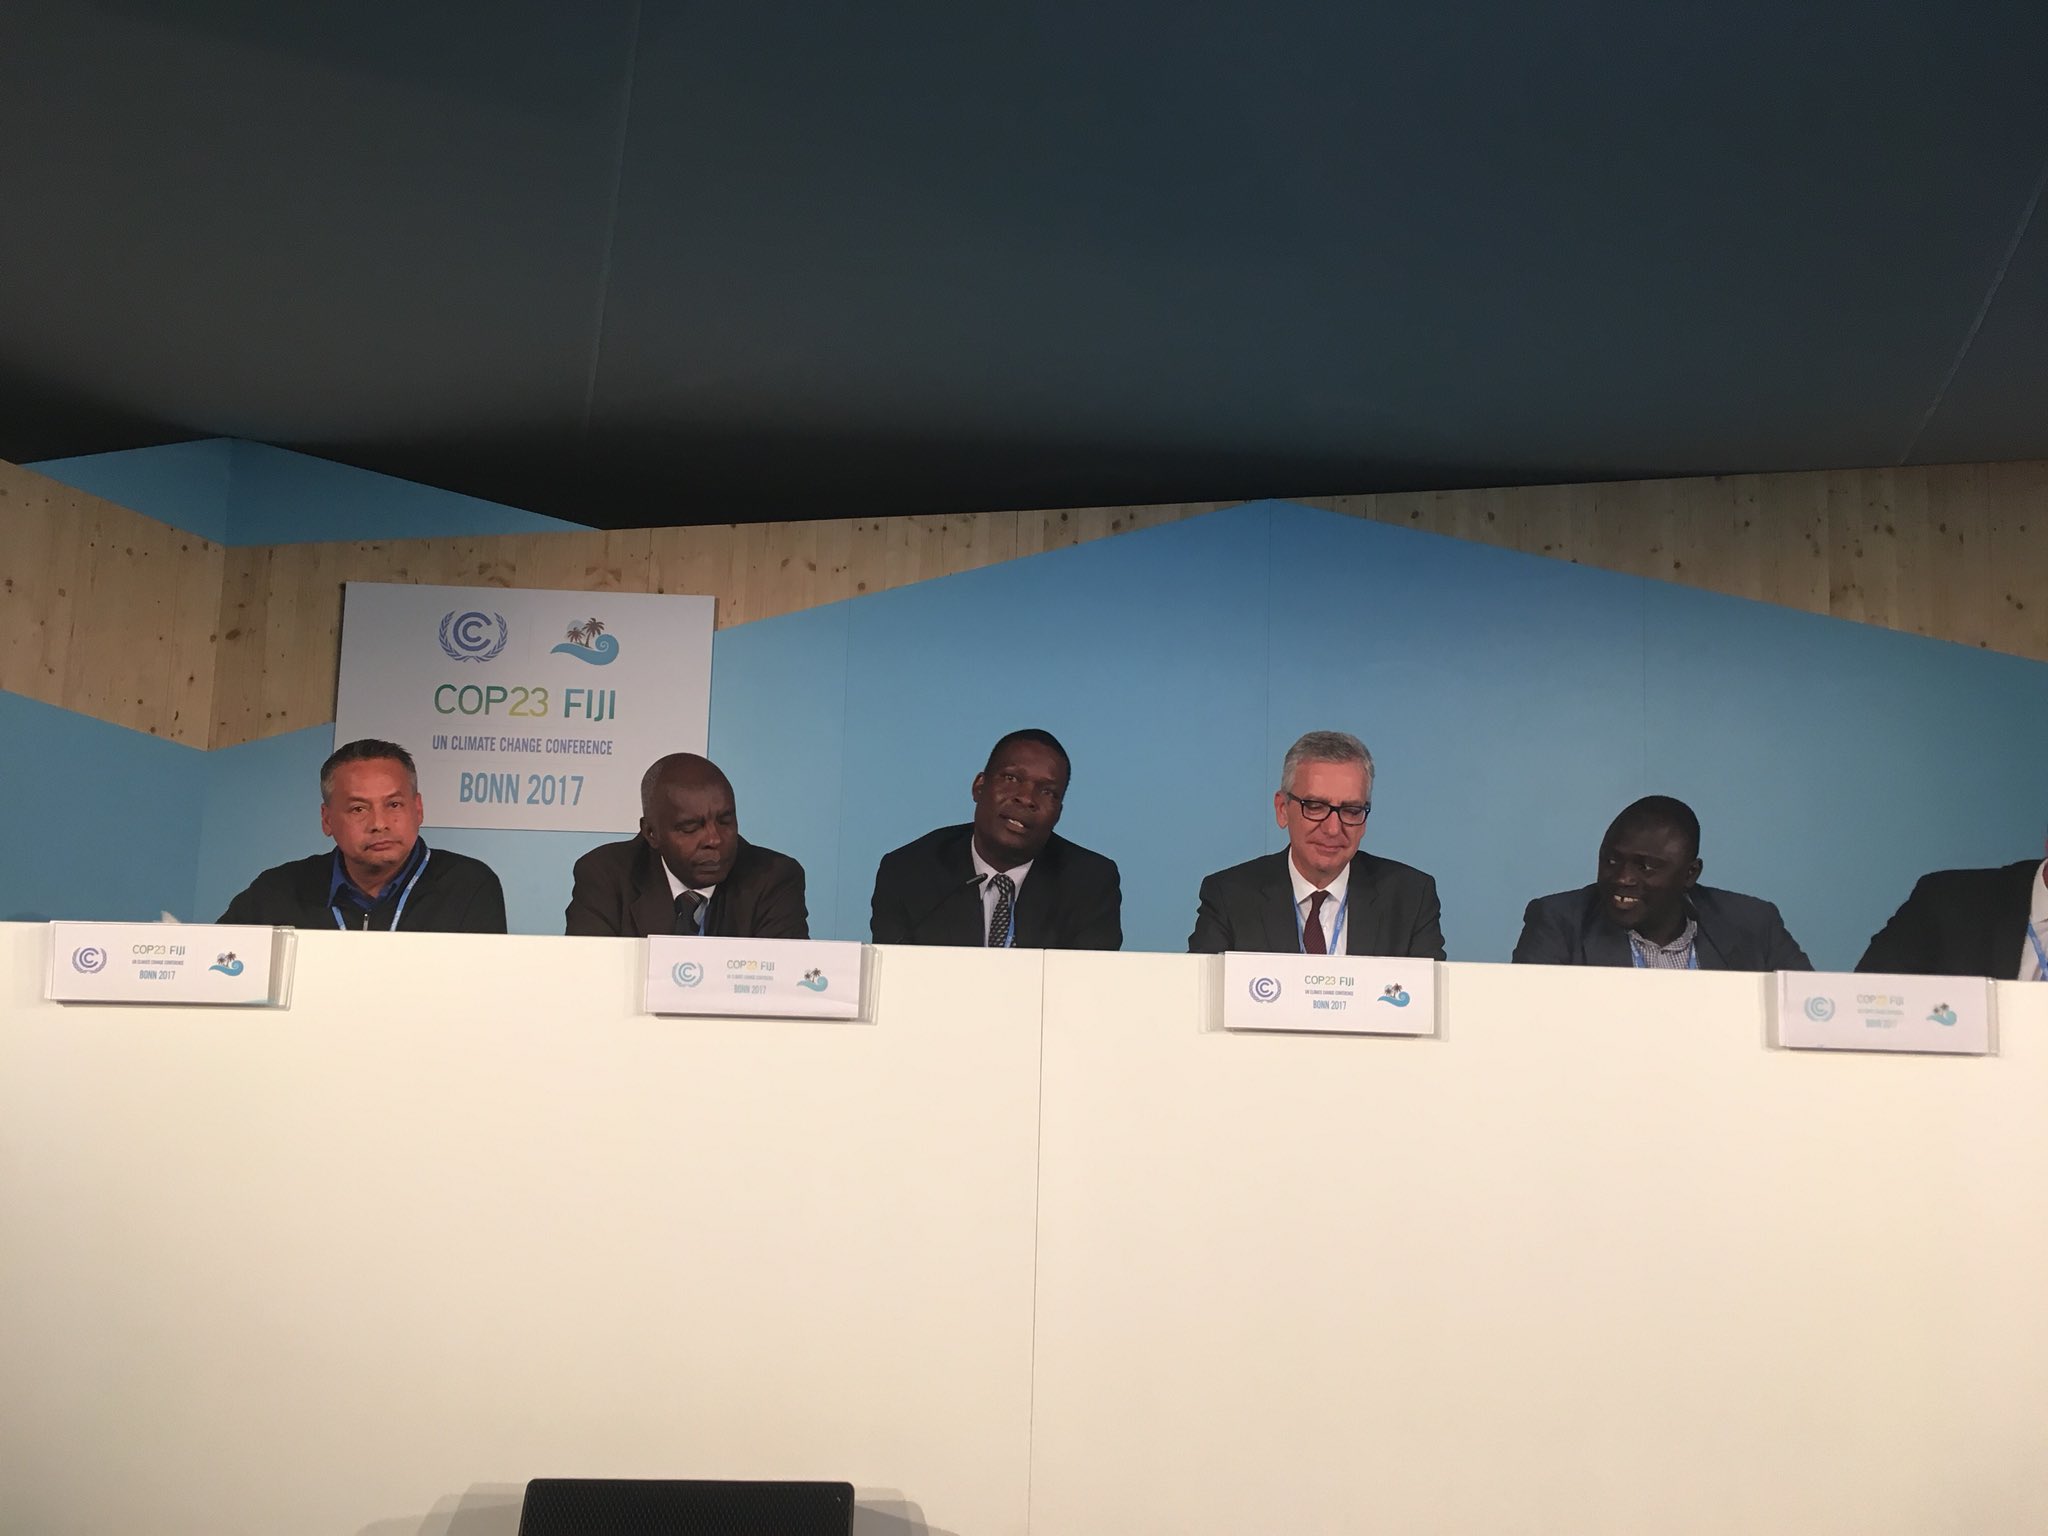 Peter Odhengo from Kenya Treasury speaks to challenge of getting climate finance to frontline, and providing enabling environment for action by Counties - need to bring private investment to the county too. Kenya set up climate fund & access @GCF_News #MoneyWhereItMatters @COP23 https://t.co/WjONHKoHYh